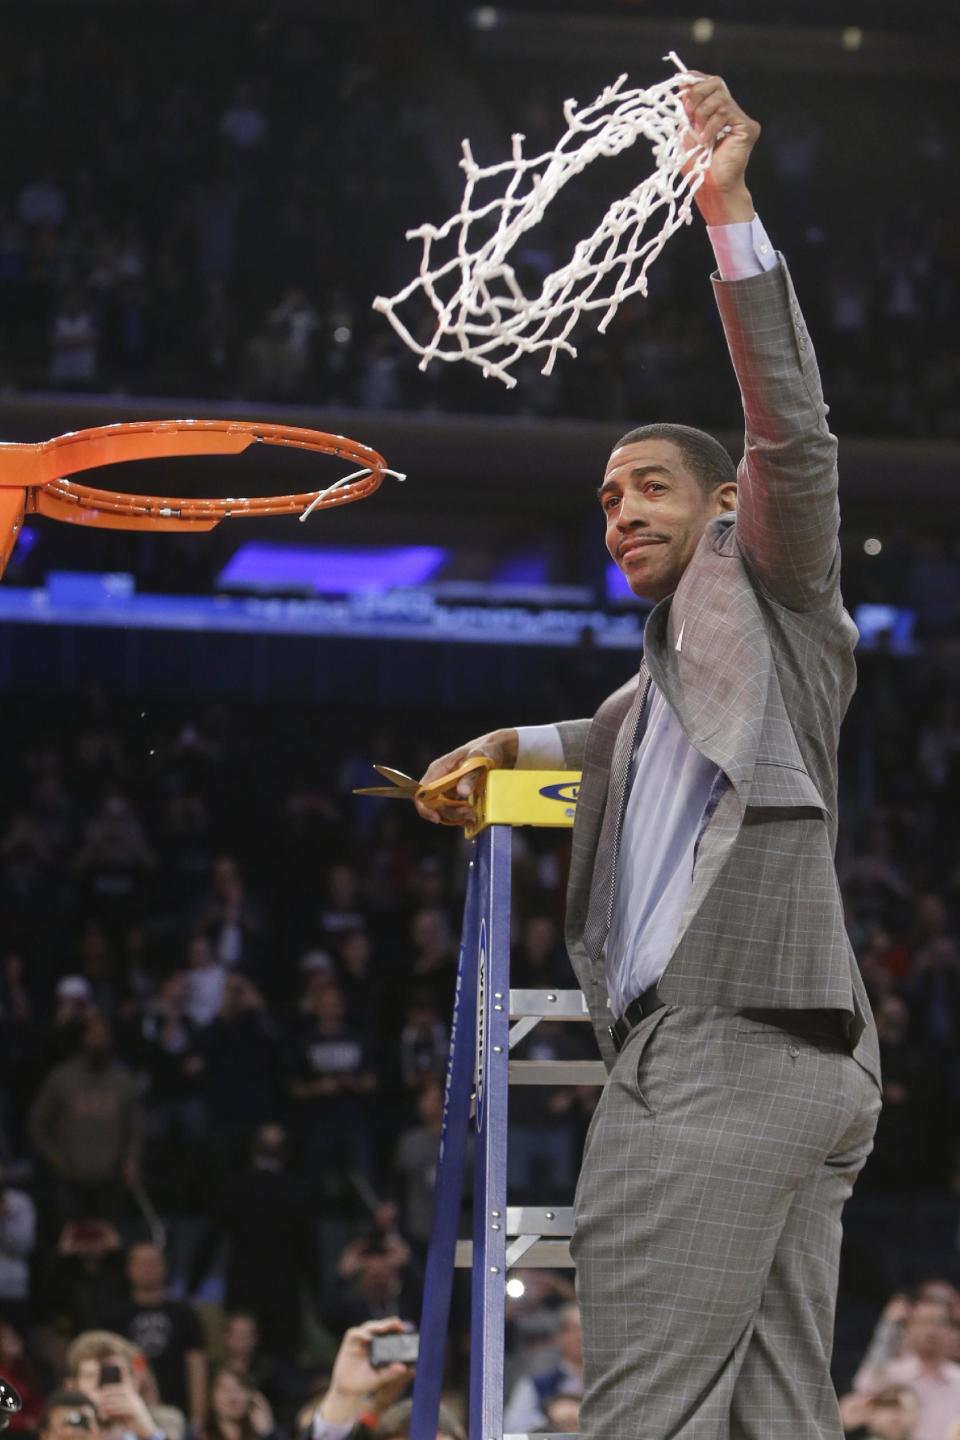 Connecticut head coach Kevin Ollie displays the net to the crowd after cutting it down after the regional final against Michigan State in the NCAA college basketball tournament Sunday, March 30, 2014, in New York. Connecticut won 60-54. (AP Photo/Frank Franklin II)